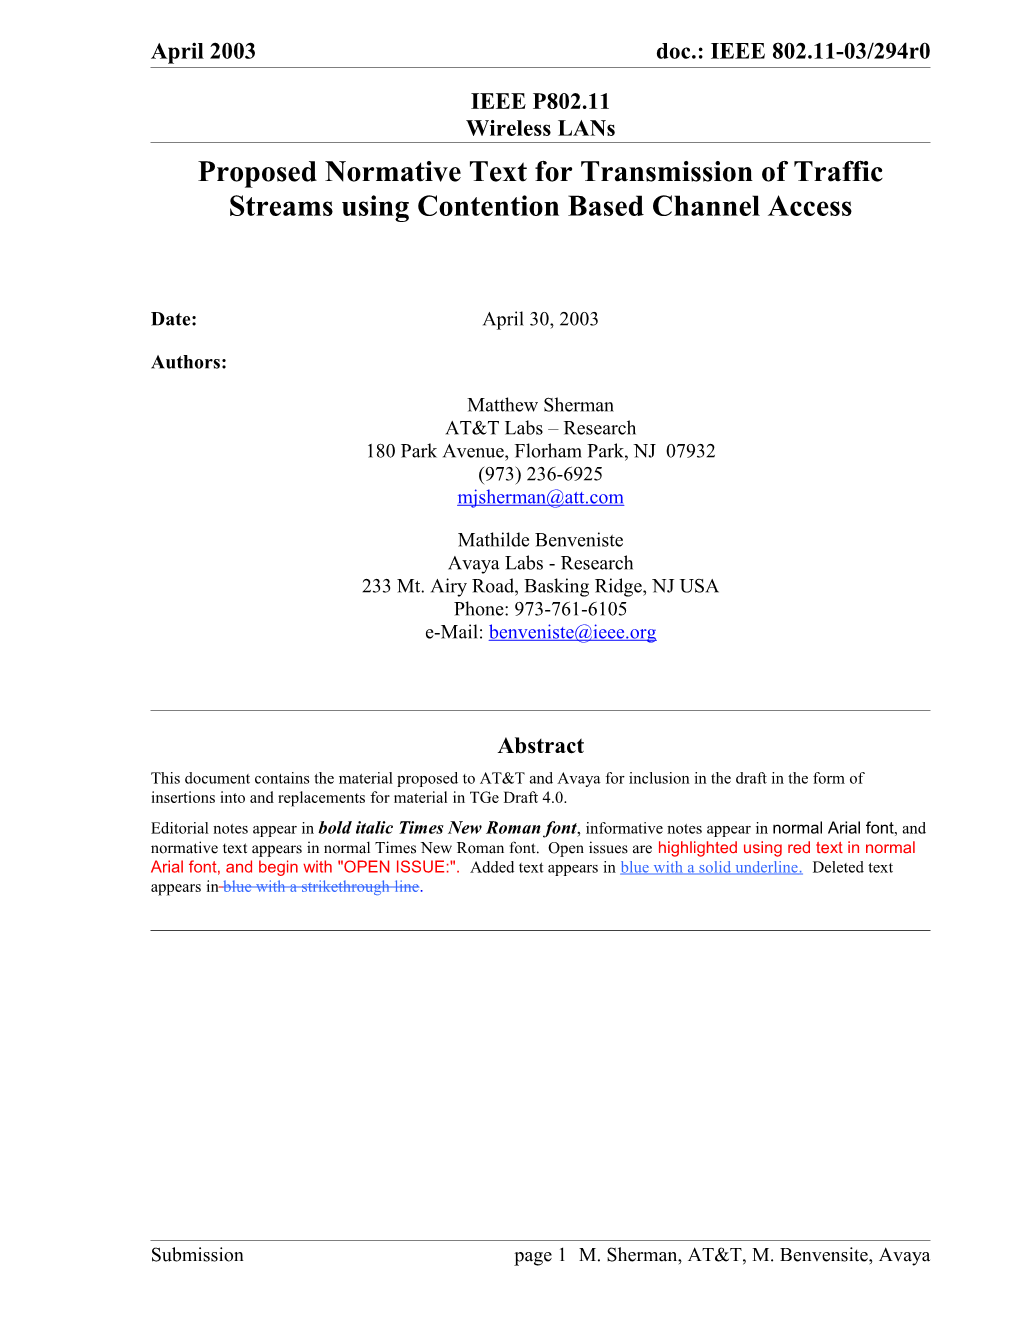 Proposed Normative Text for Transmission of Traffic Streams Using Contention Based Channel